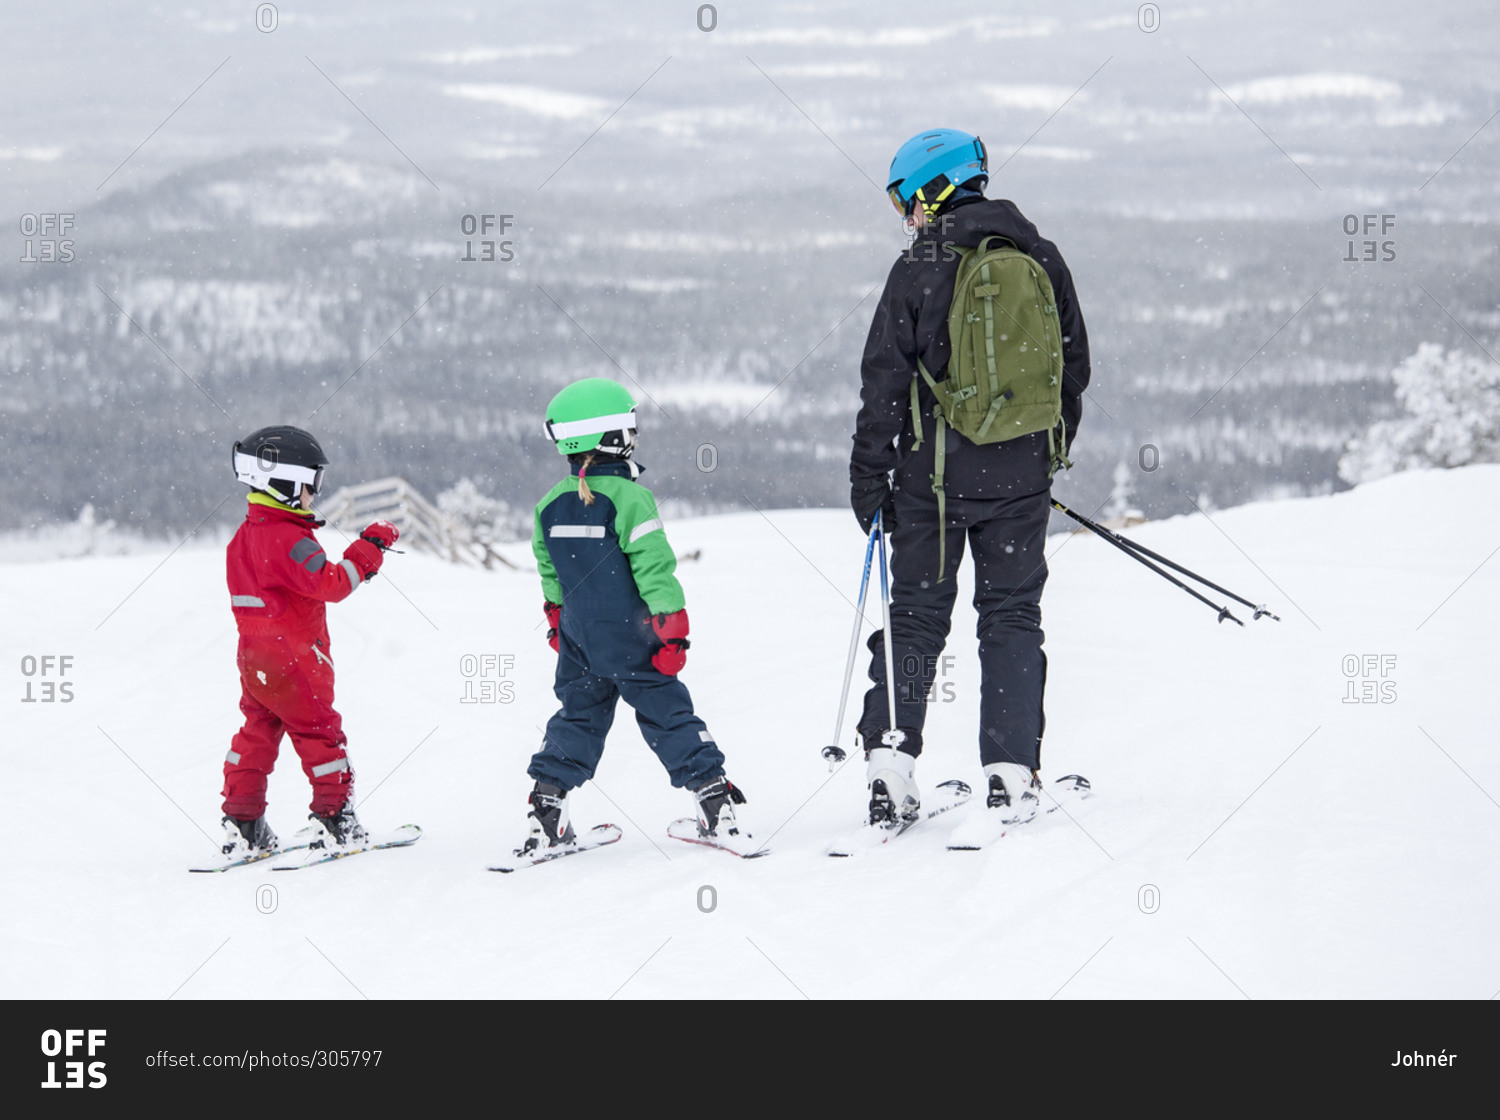 Father with children skiing